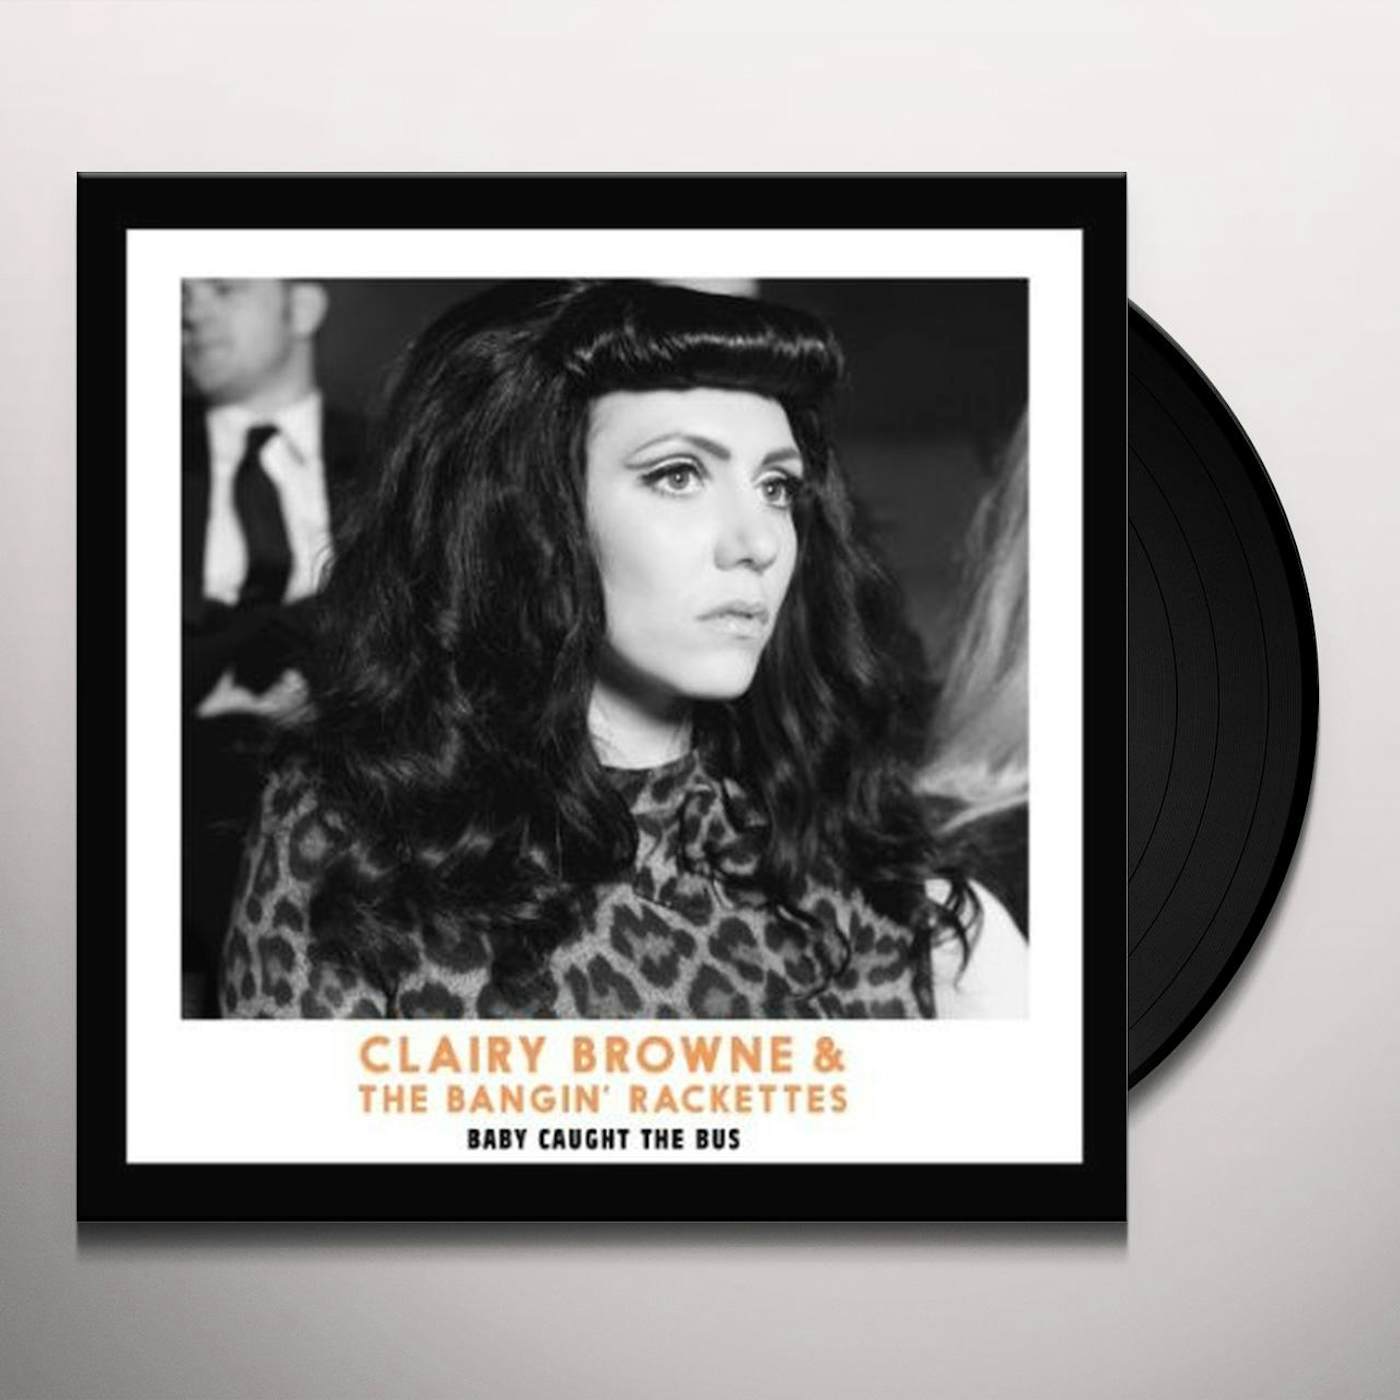 Clairy Browne & The Bangin' Rackettes Baby Caught The Bus Vinyl Record